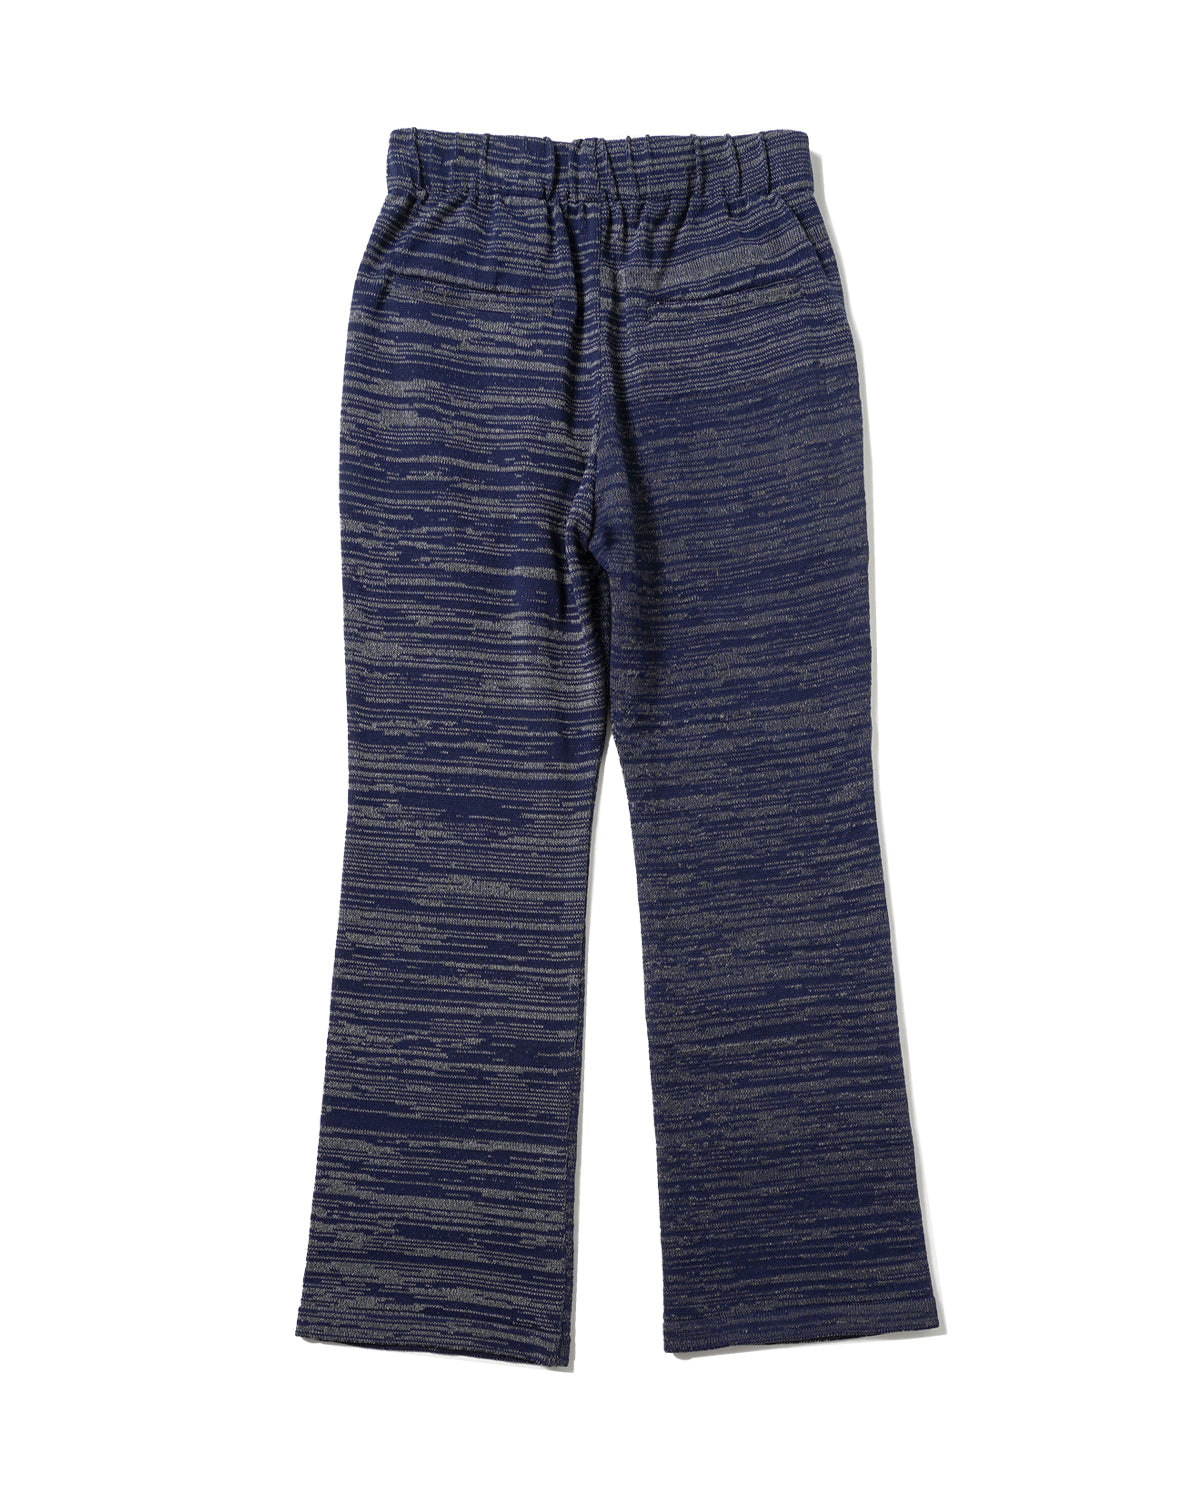 REFLECTOR KNIT PANTS (NVY) - Baby's all right